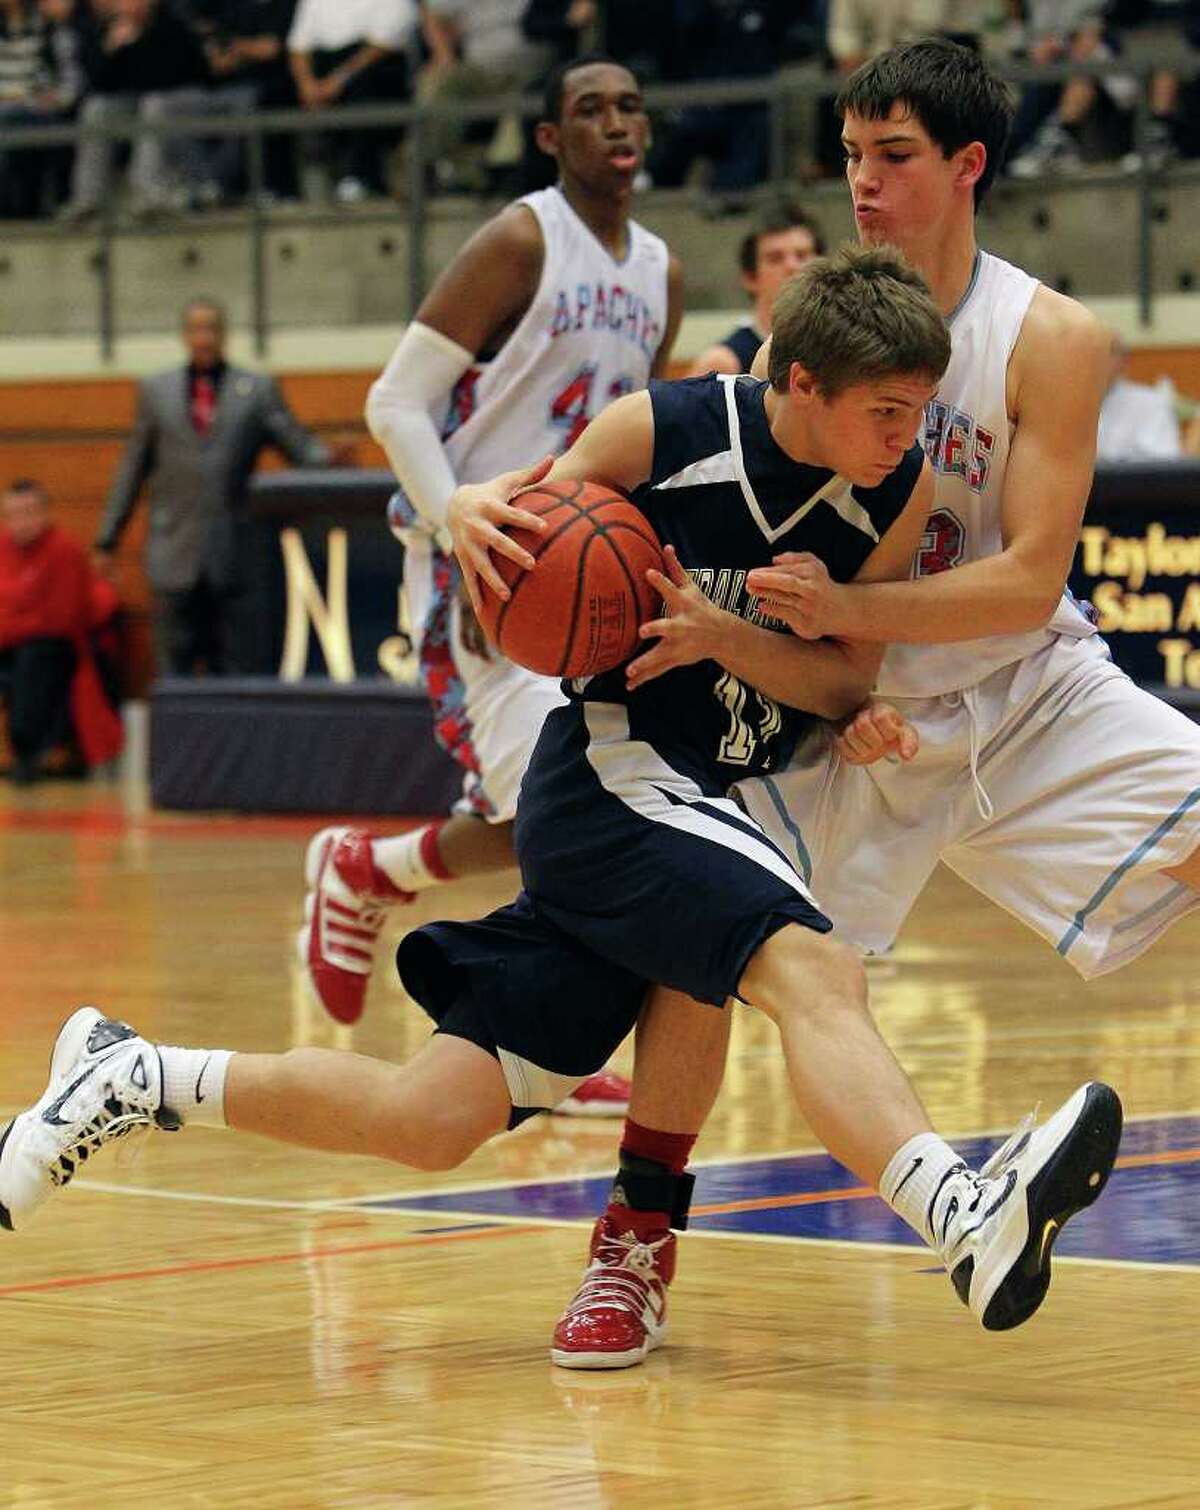 Central Catholic's Collin Fabac (11) drives to basket against Antonian's Mike Boyd (23) in boys basketball at Taylor Fieldhouse on Wednesday, Jan. 12, 2011. Central Catholic defeated Antonian 64-54. Kin Man Hui/kmhui@express-news.net